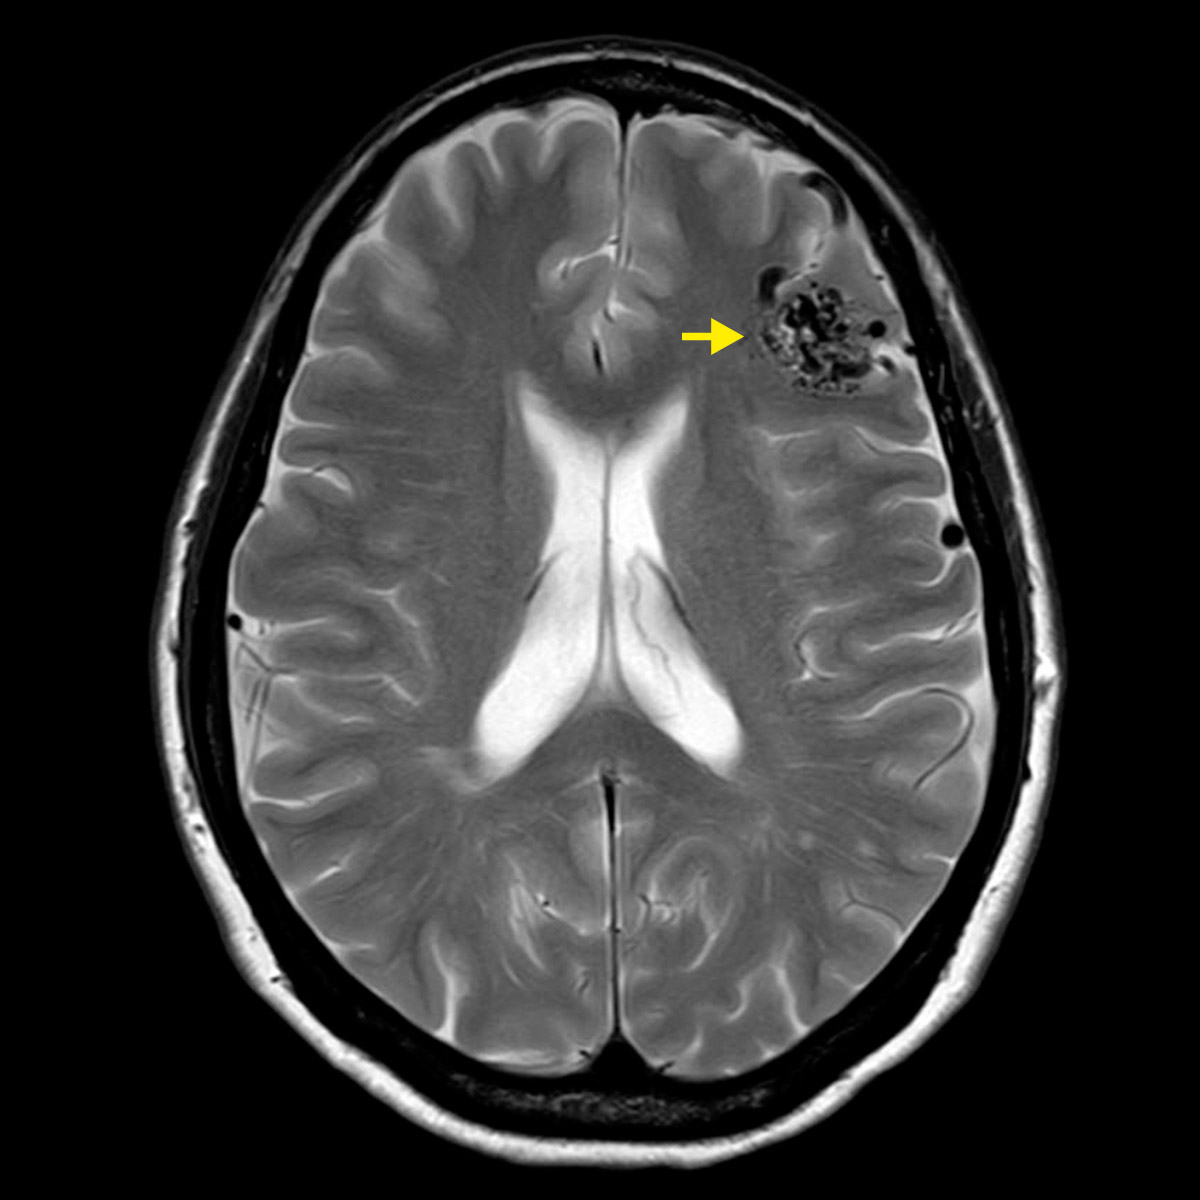 Cranial MRI with clearly visible AVM in the upper right of the image. A yellow arrow points to the AVM. The vessels of the AVM are visible as black dots and serpentine lines.